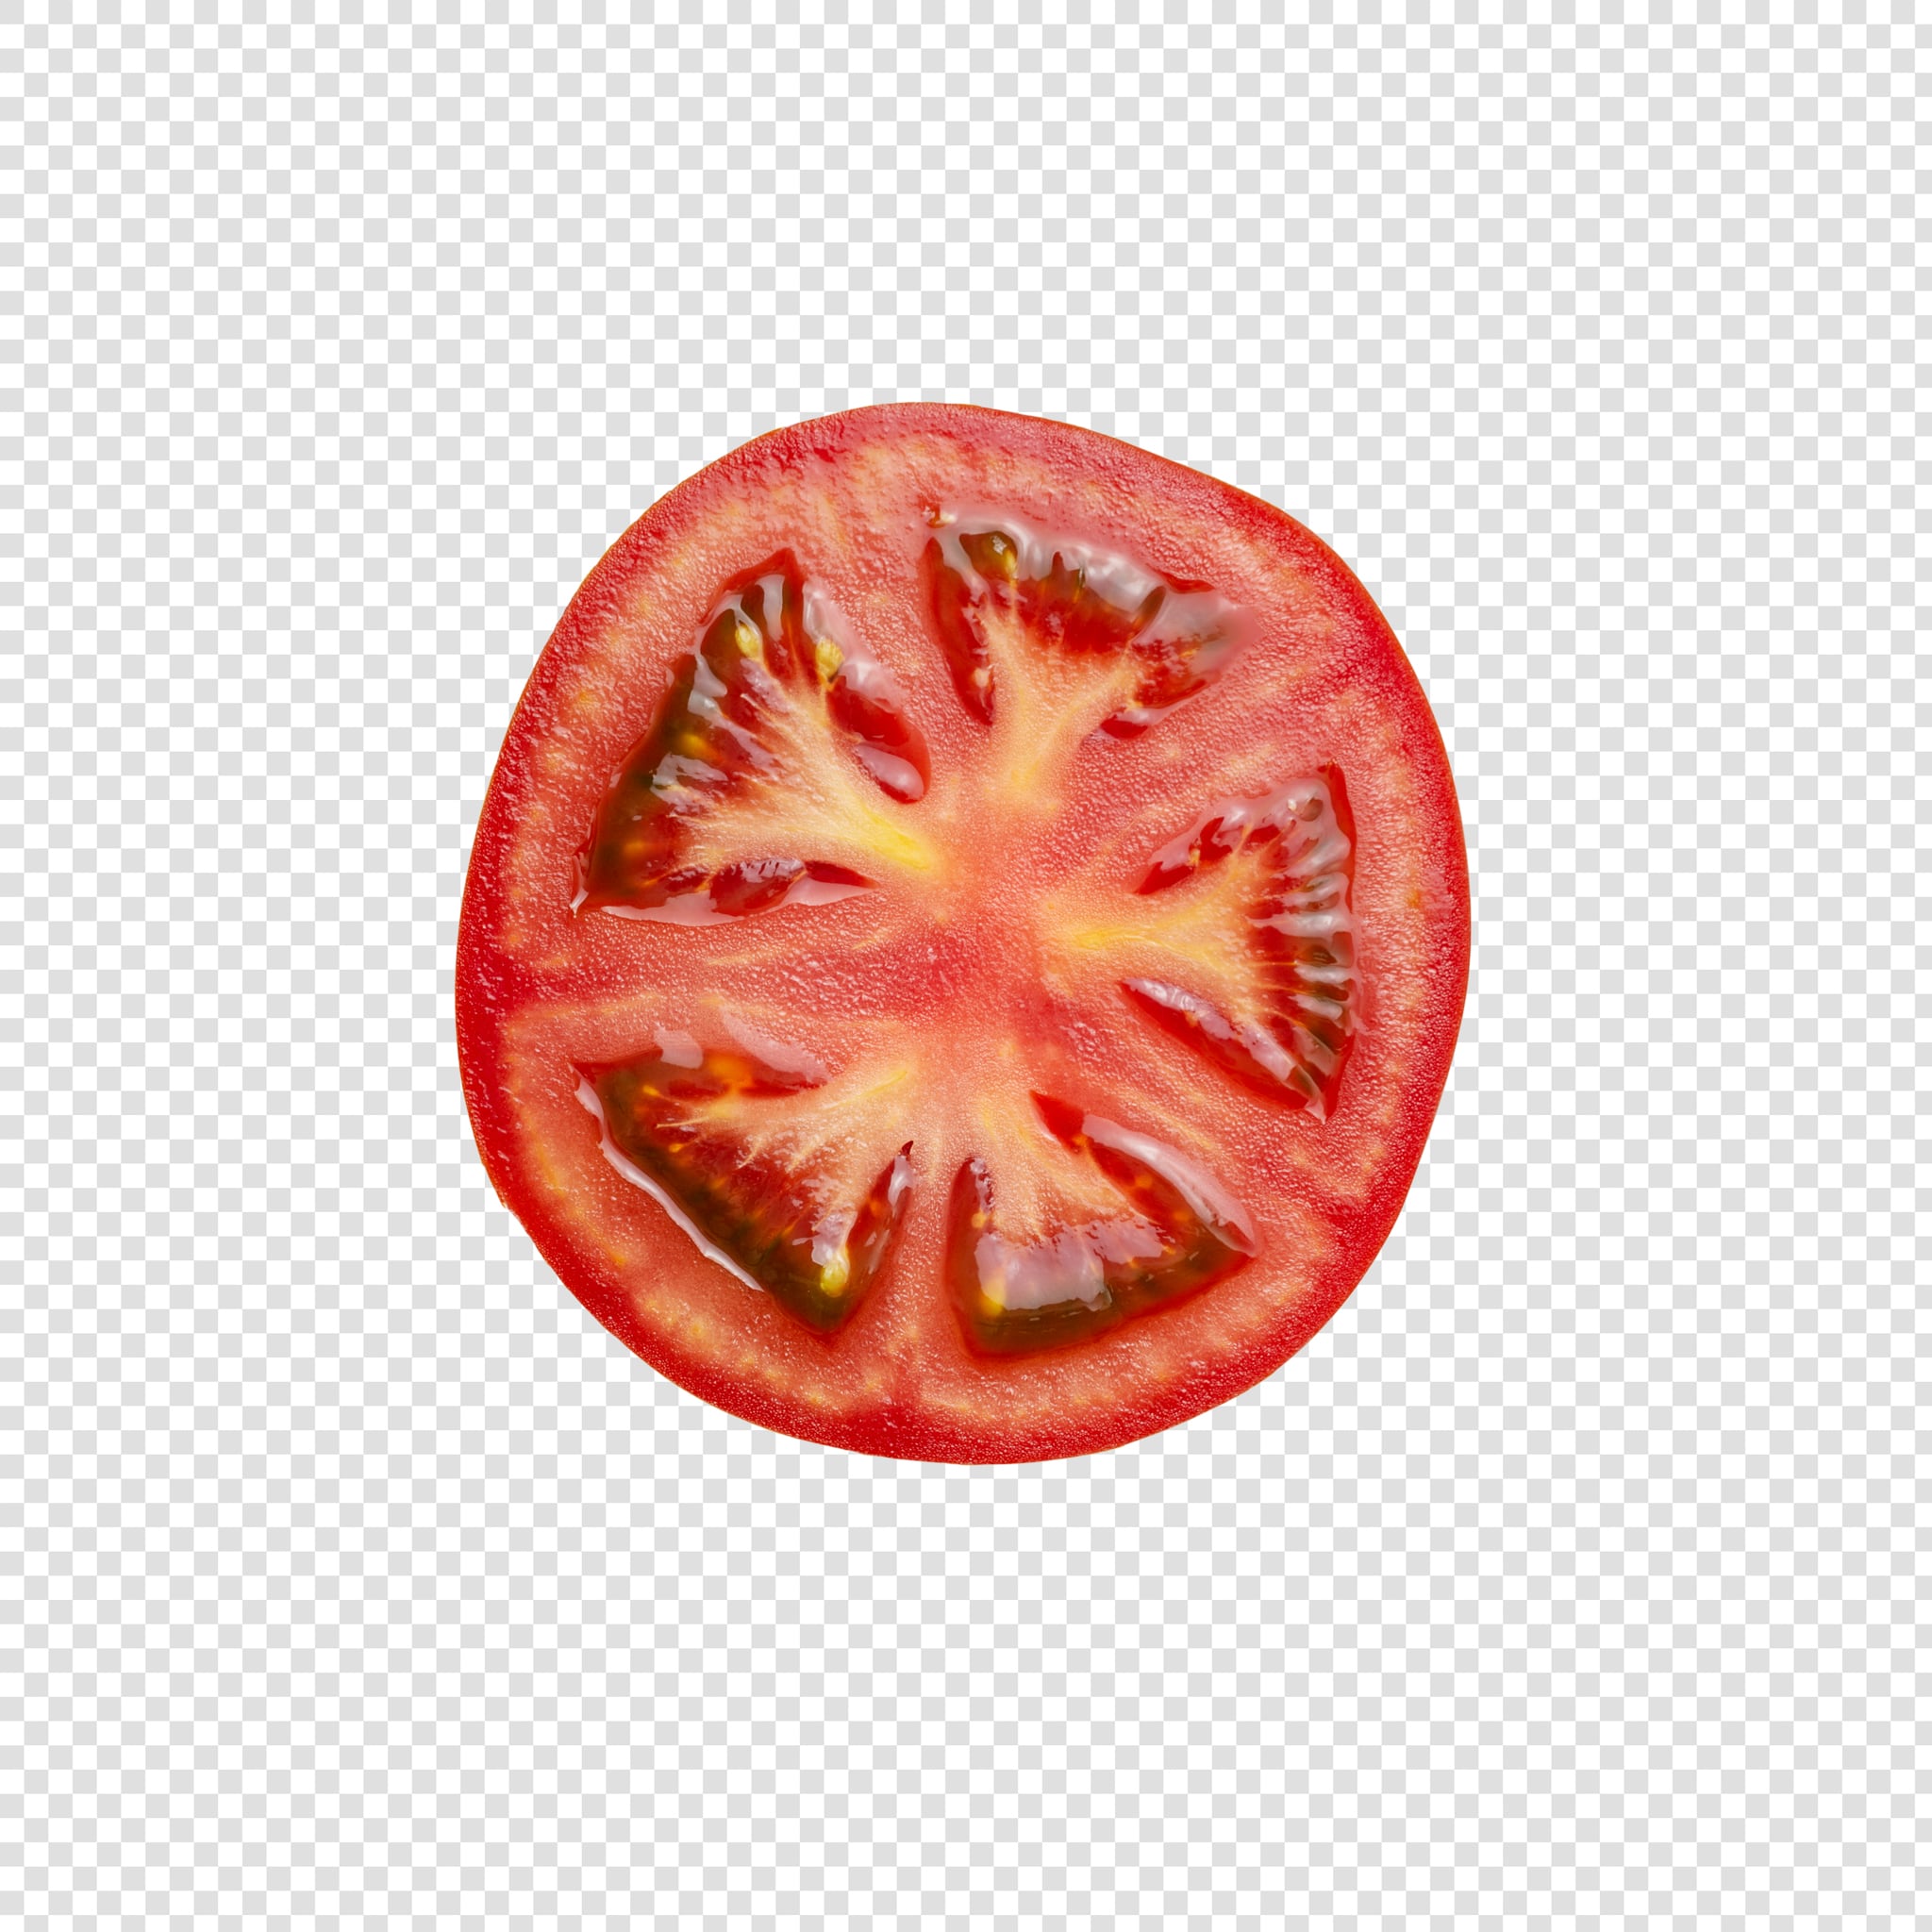 Clean Isolated PSD image of Tomato on transparent background with separated shadow